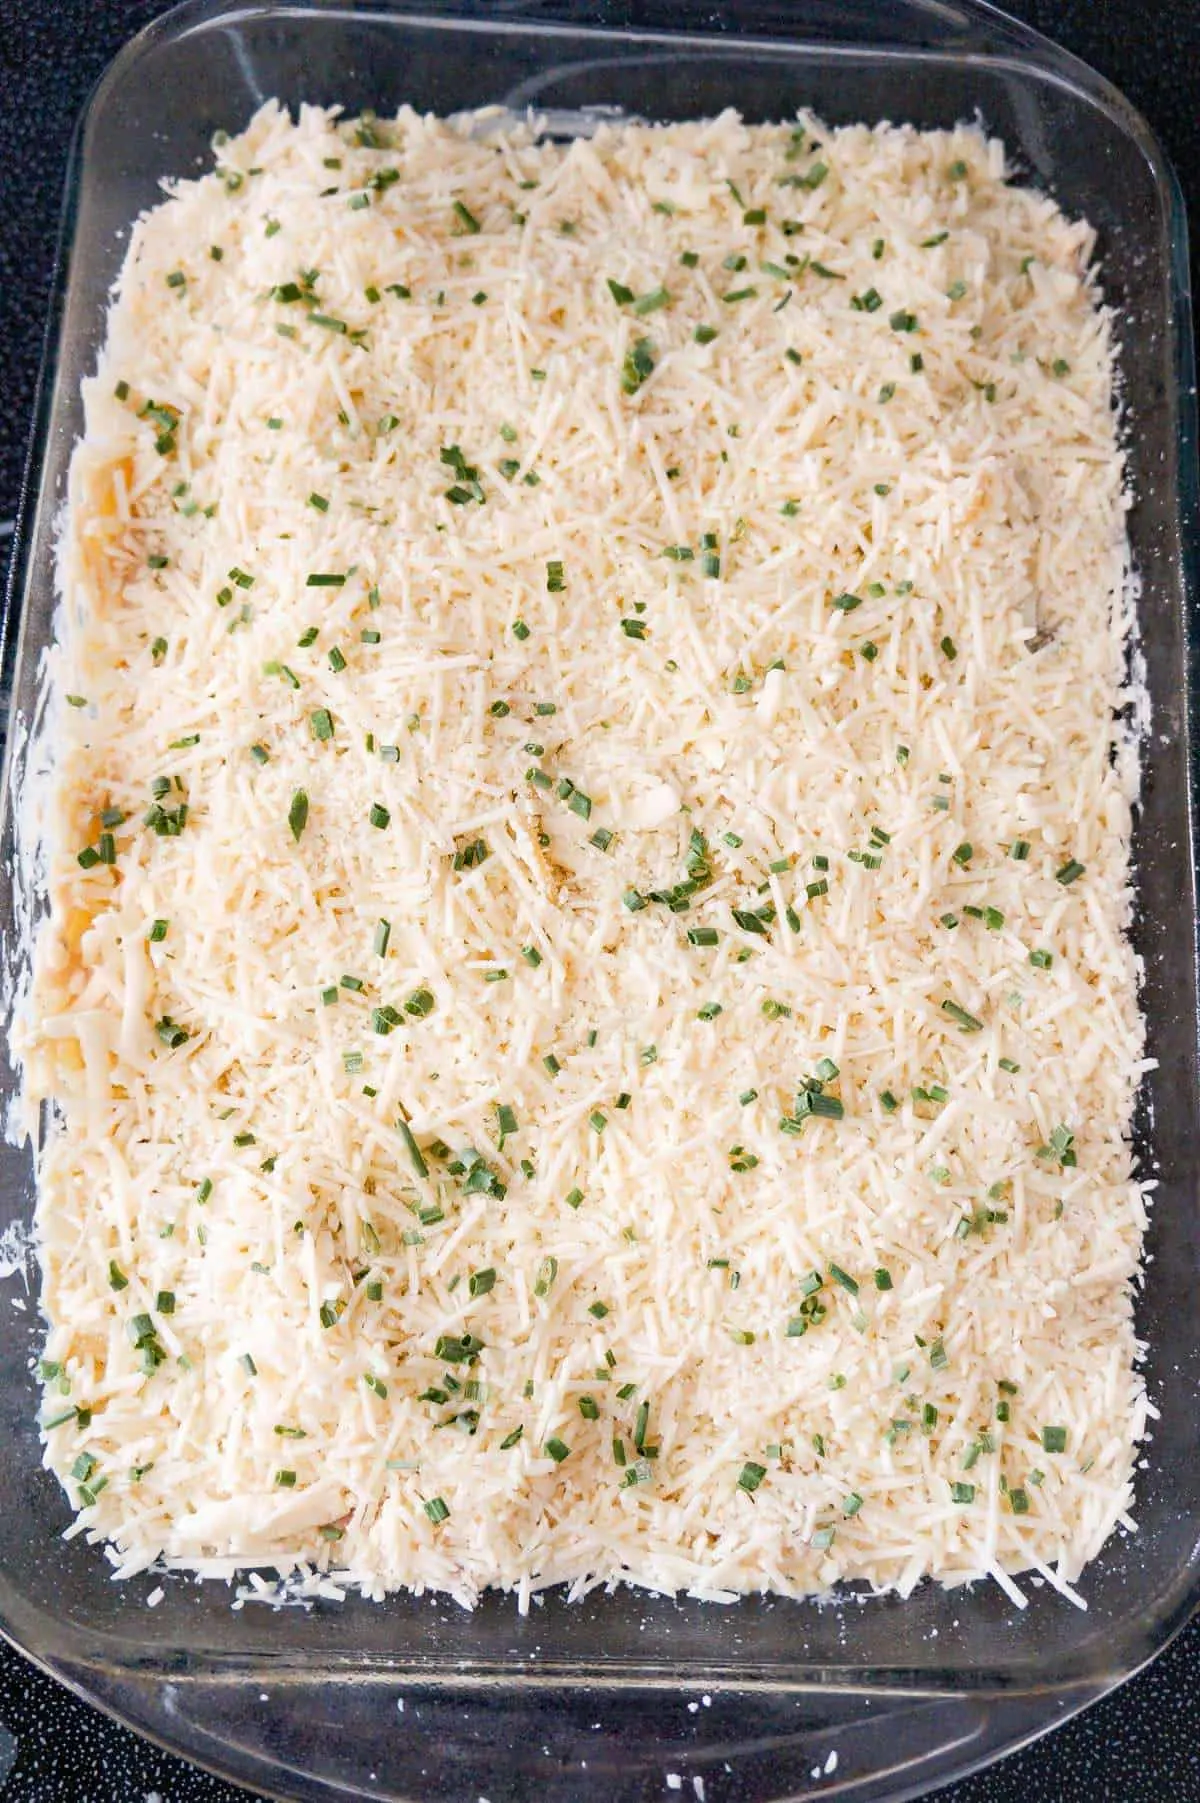 shredded mozzarella, Parmesan and chopped chives on top of turkey tetrazzini before baking